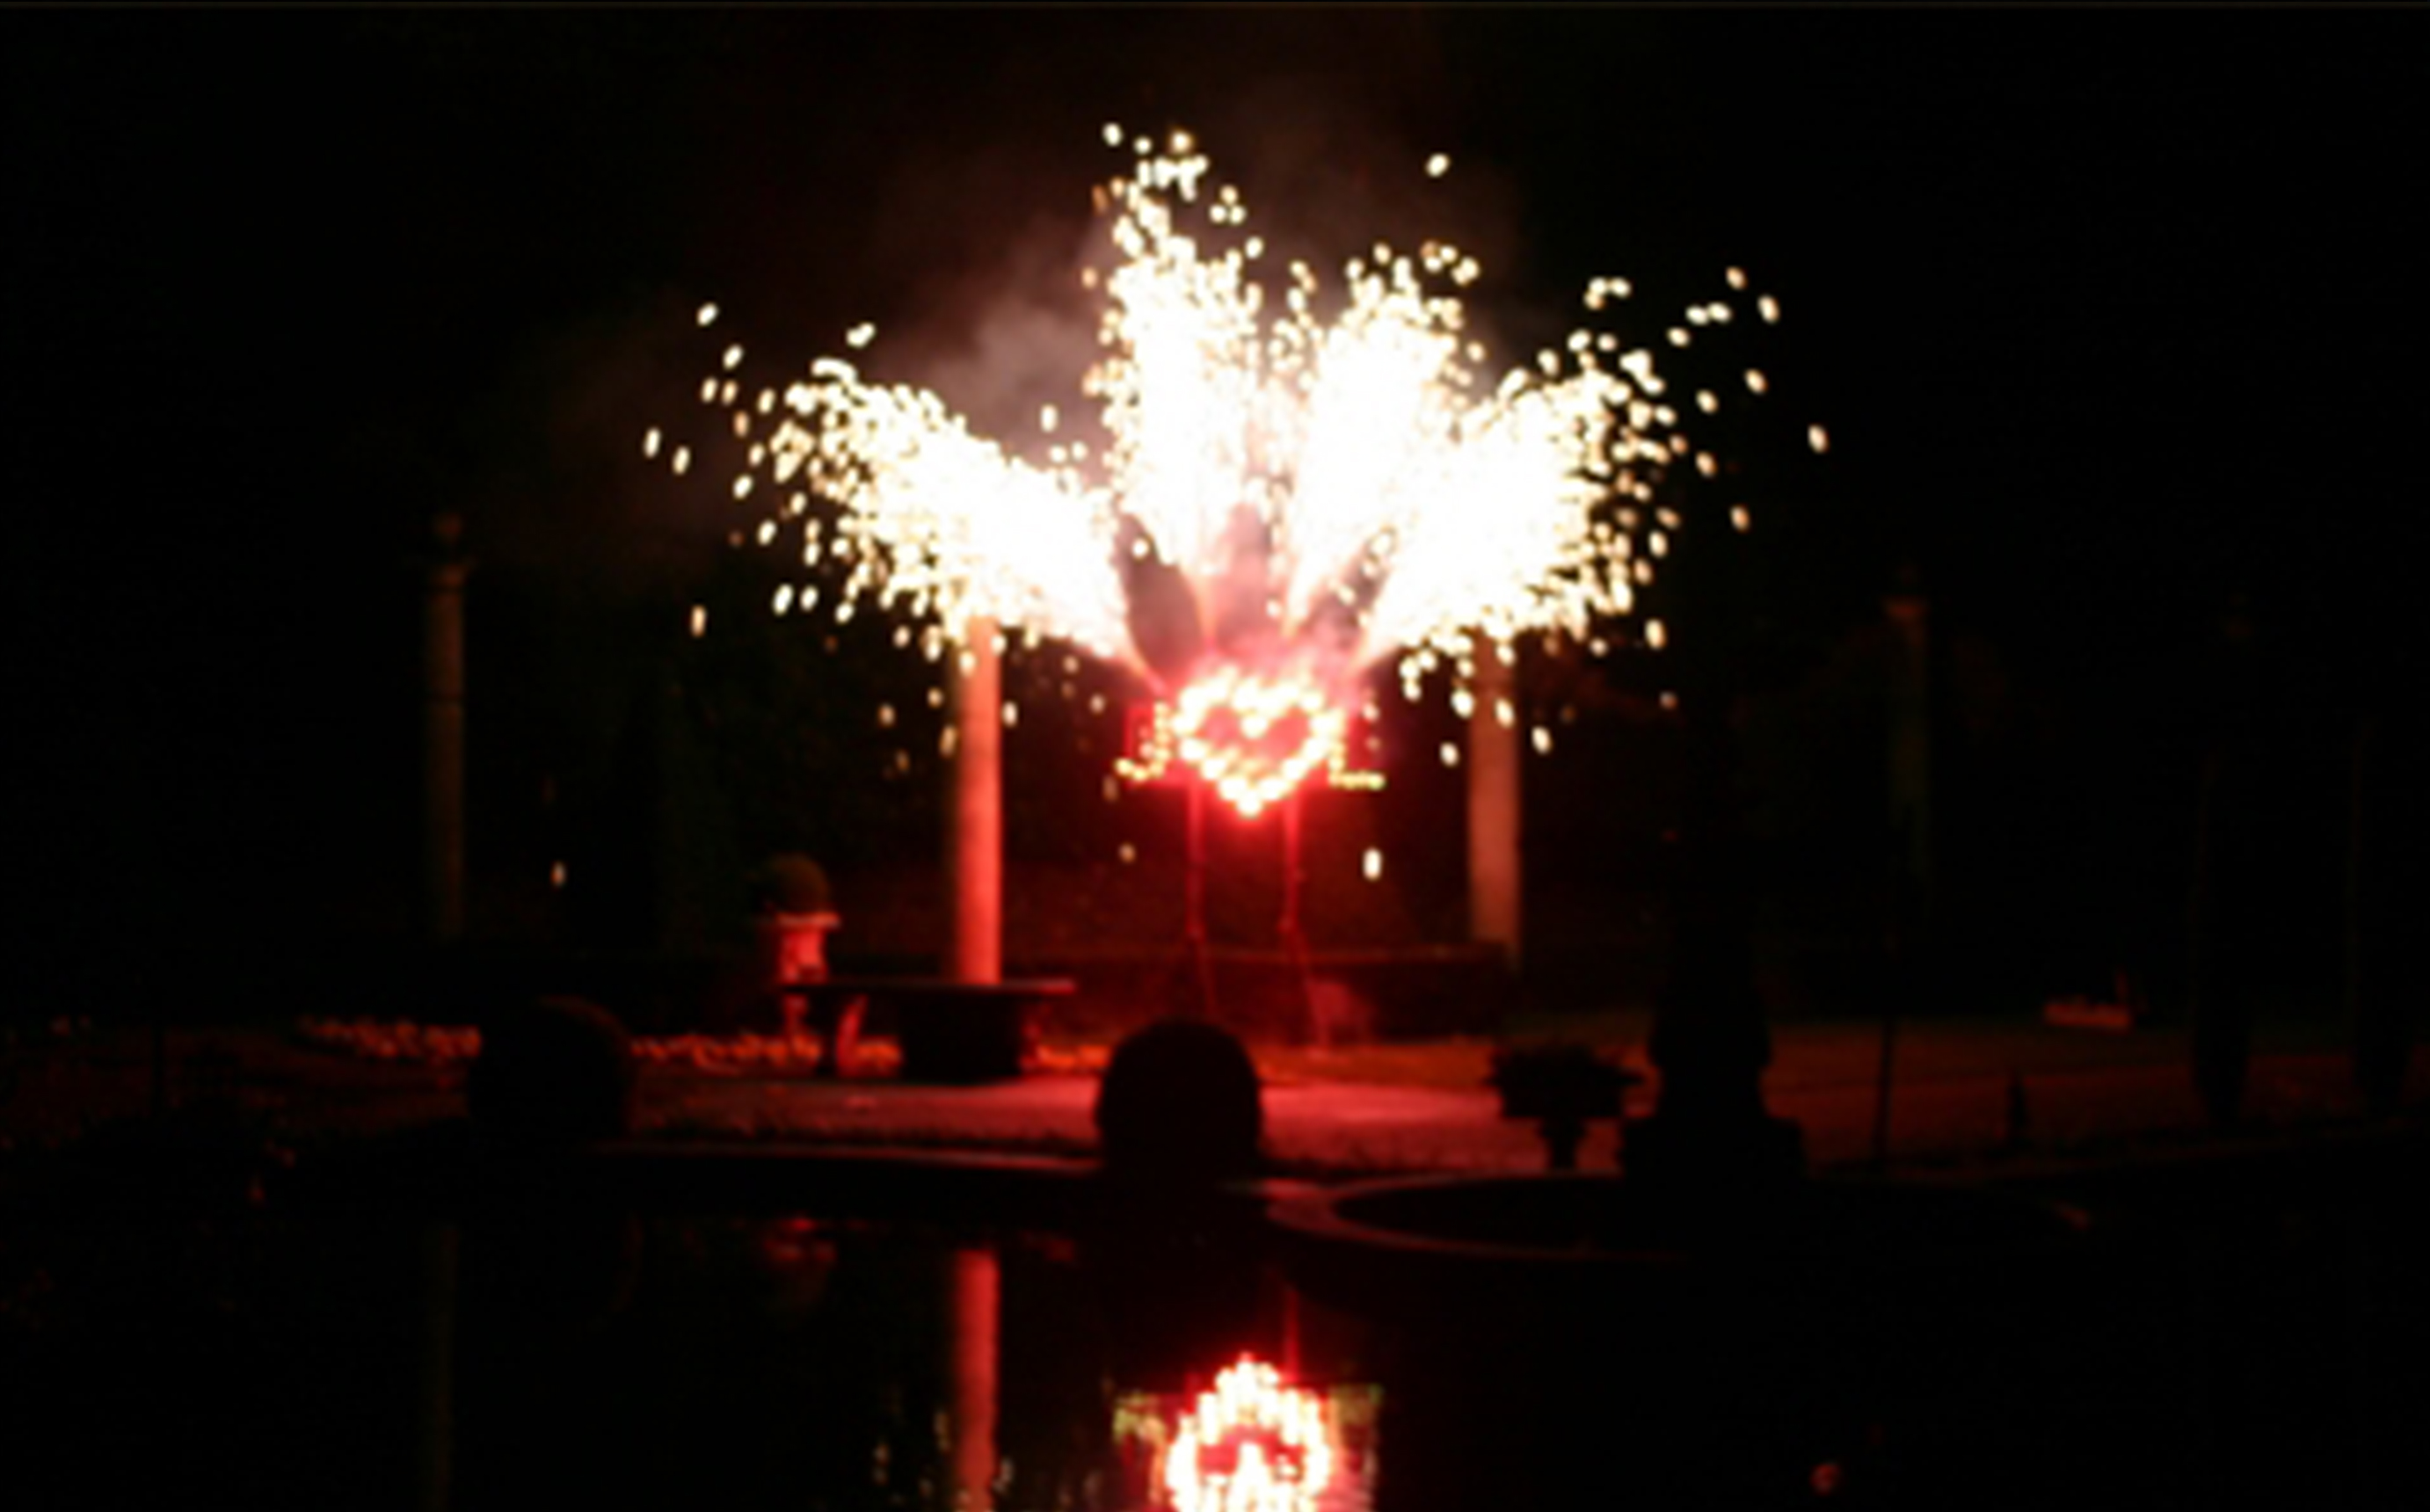 A Fireworks Solutions Limited wedding display, featuring a red heart for the happy couple